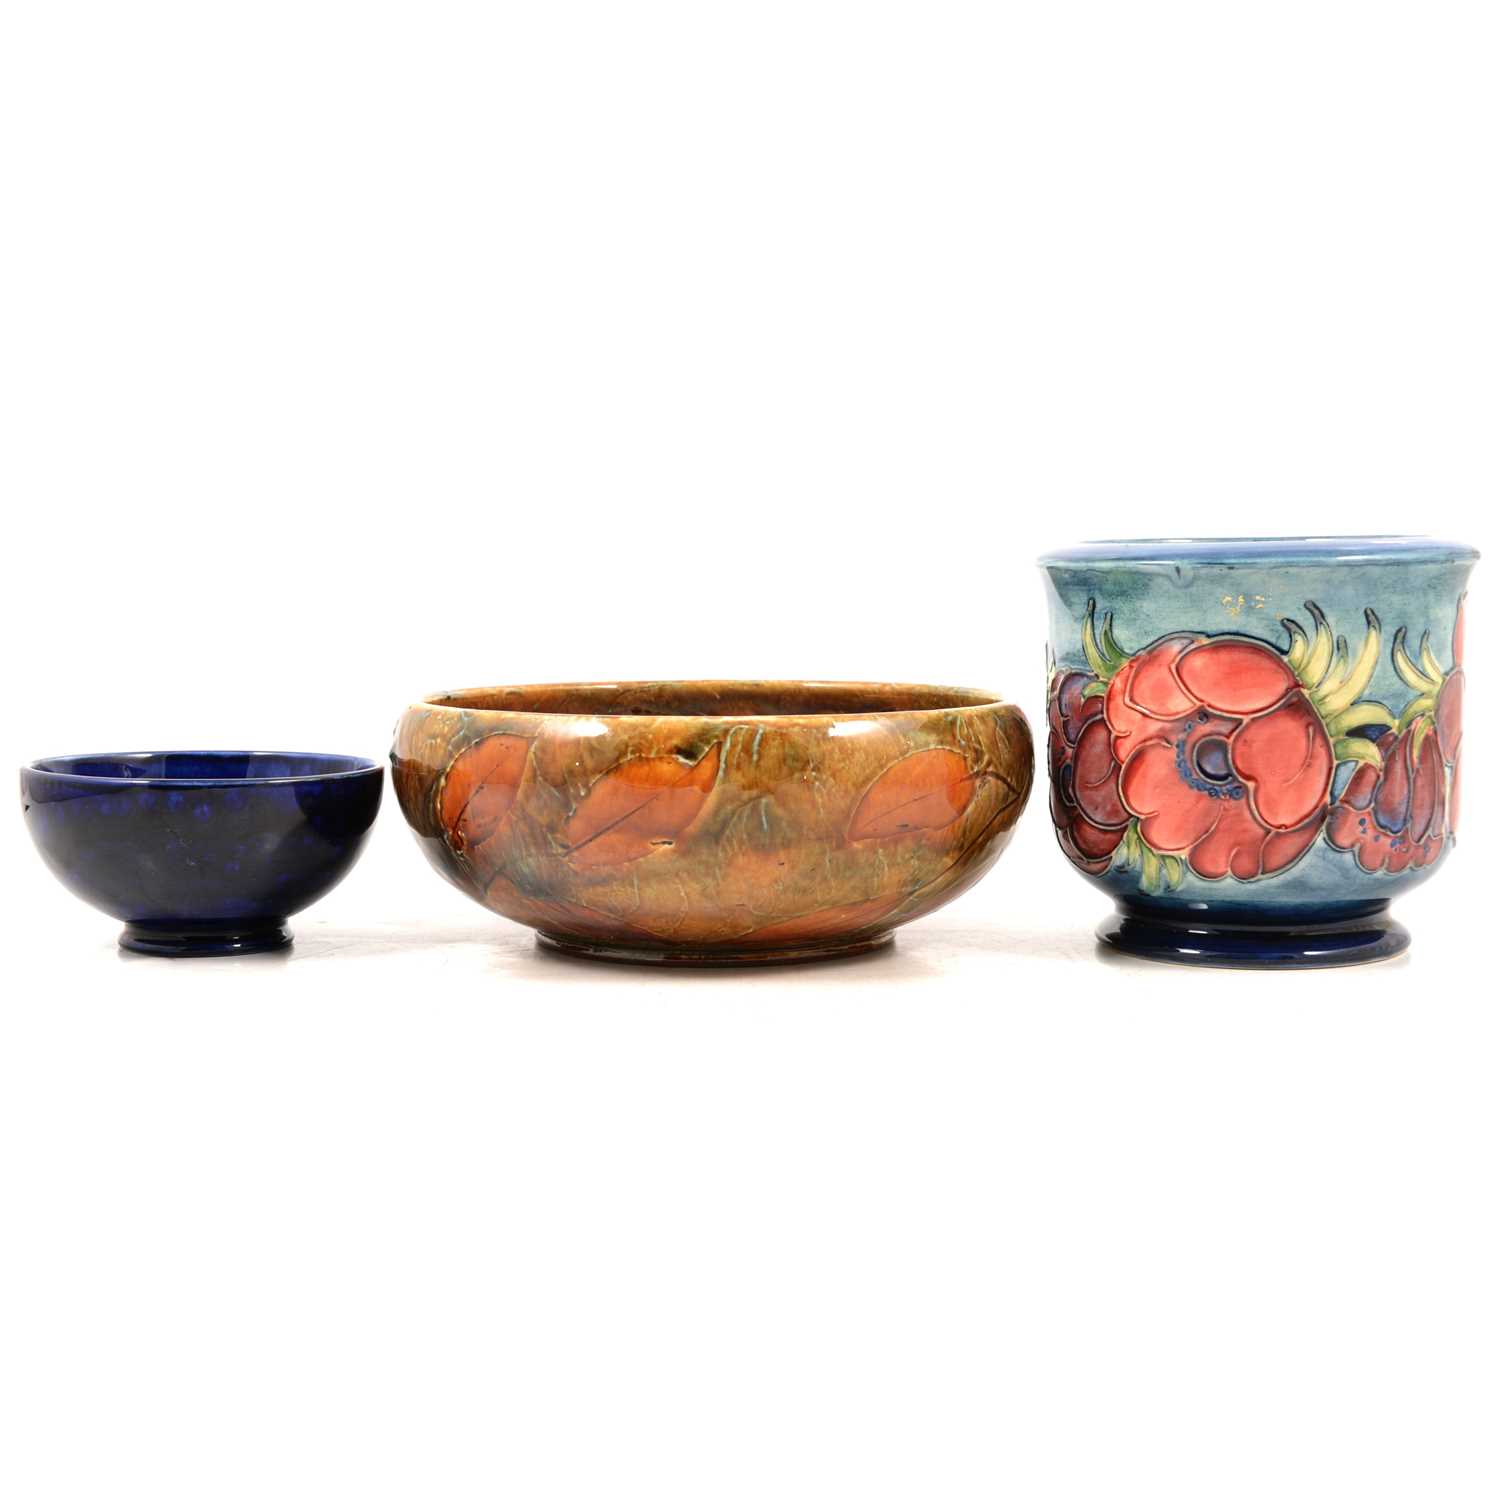 Lot 31 - Moorcroft Pottery planter, Clematis pattern, a similar bowl, and a Royal Doulton Autumn Leaf bowl